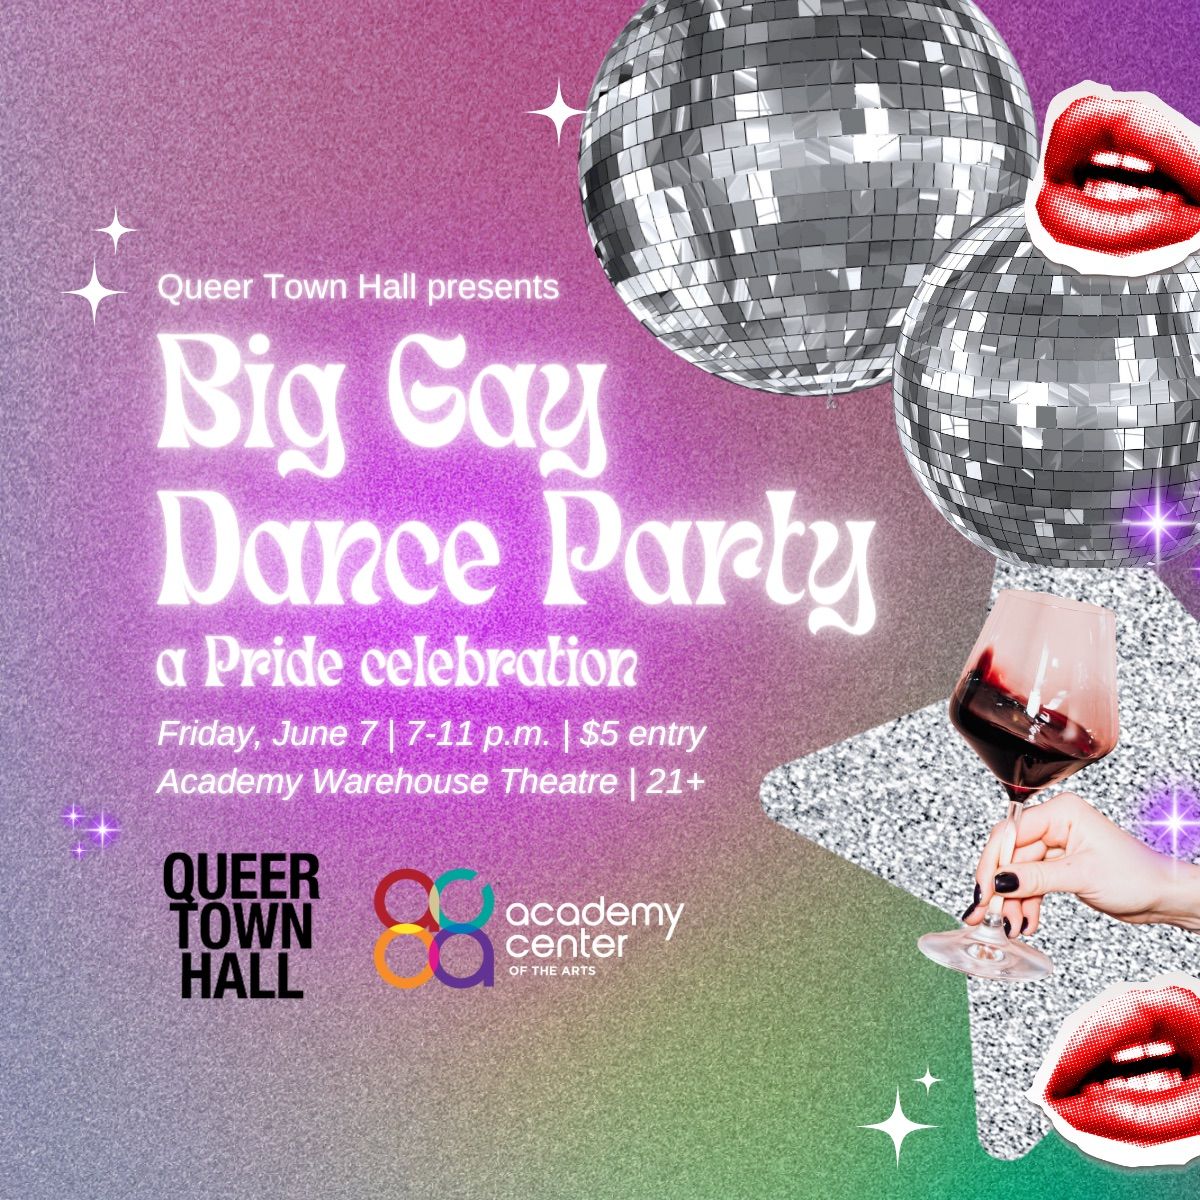 The Big Gay Dance Party: A Pride Celebration 